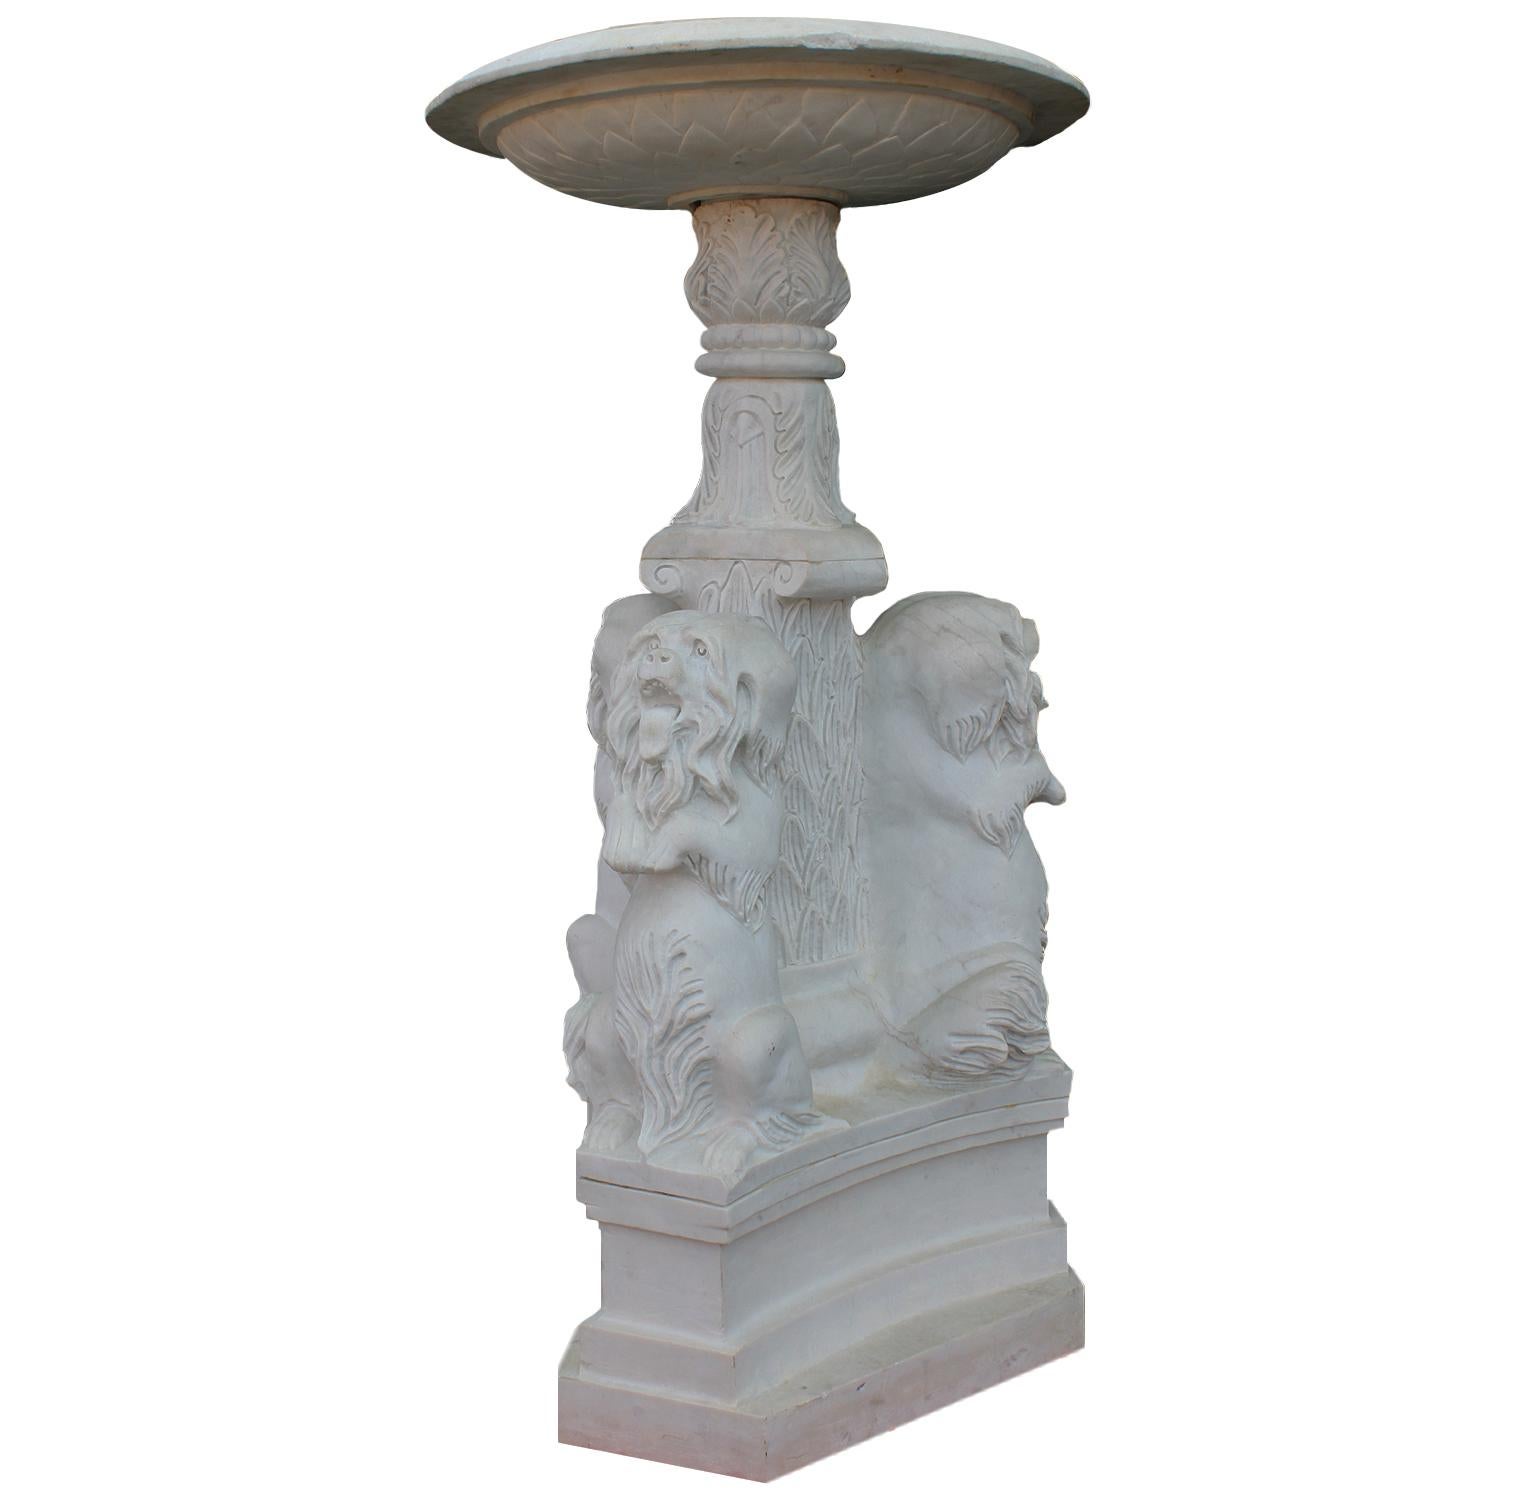 Whimsical English 19th-20th Century White Marble Figural Outdoor Dog Fountain